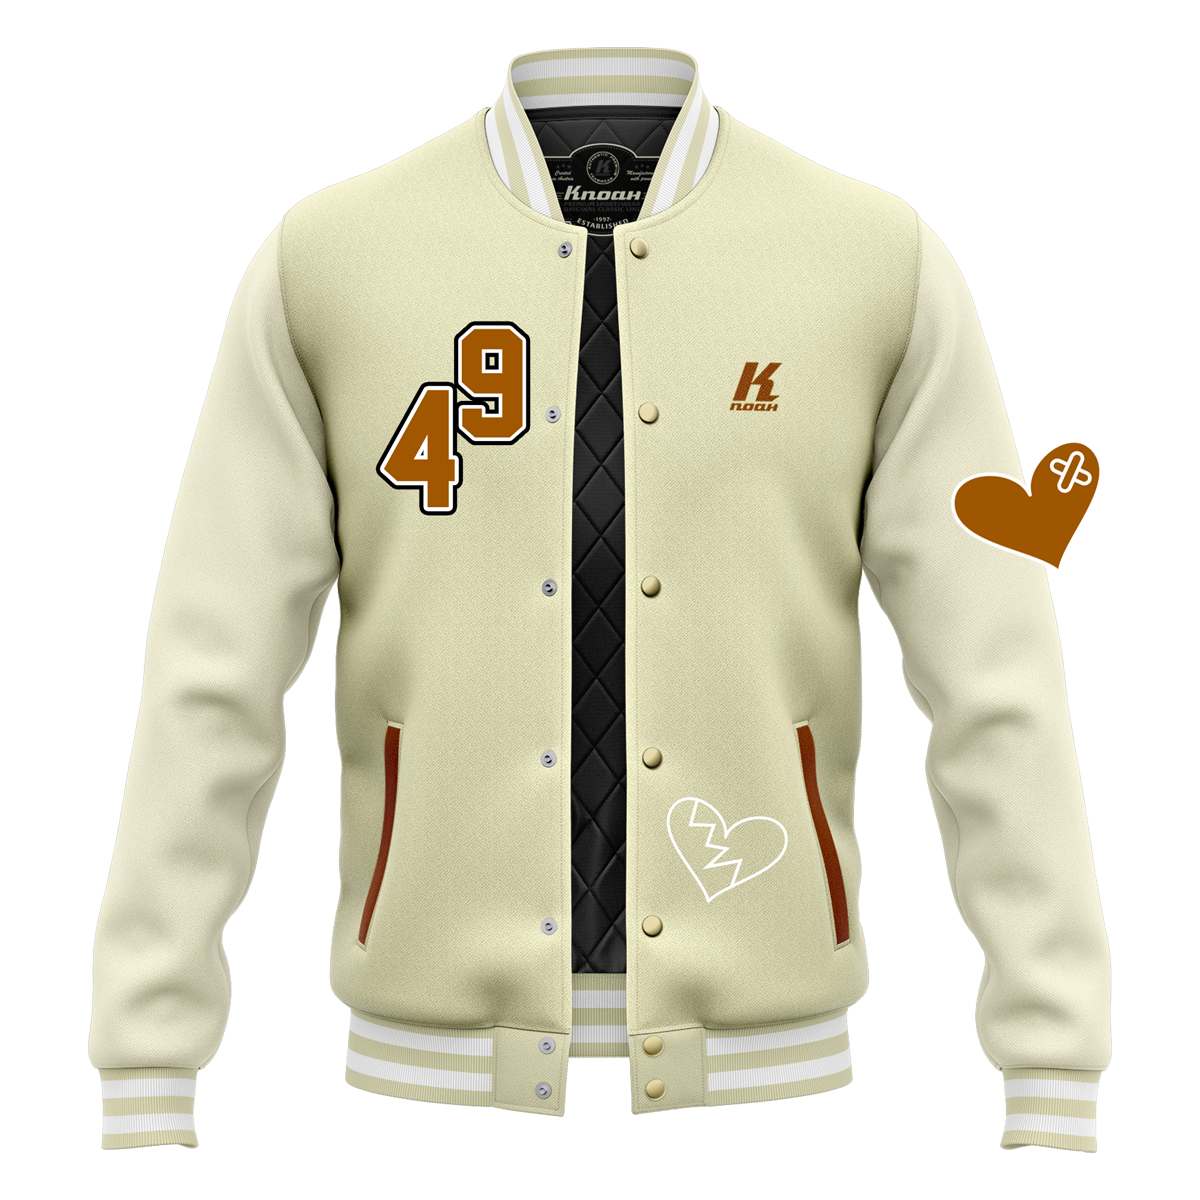 Day 2: "Hearts" Authentic Varsity Jacket with Playernumber/Initials